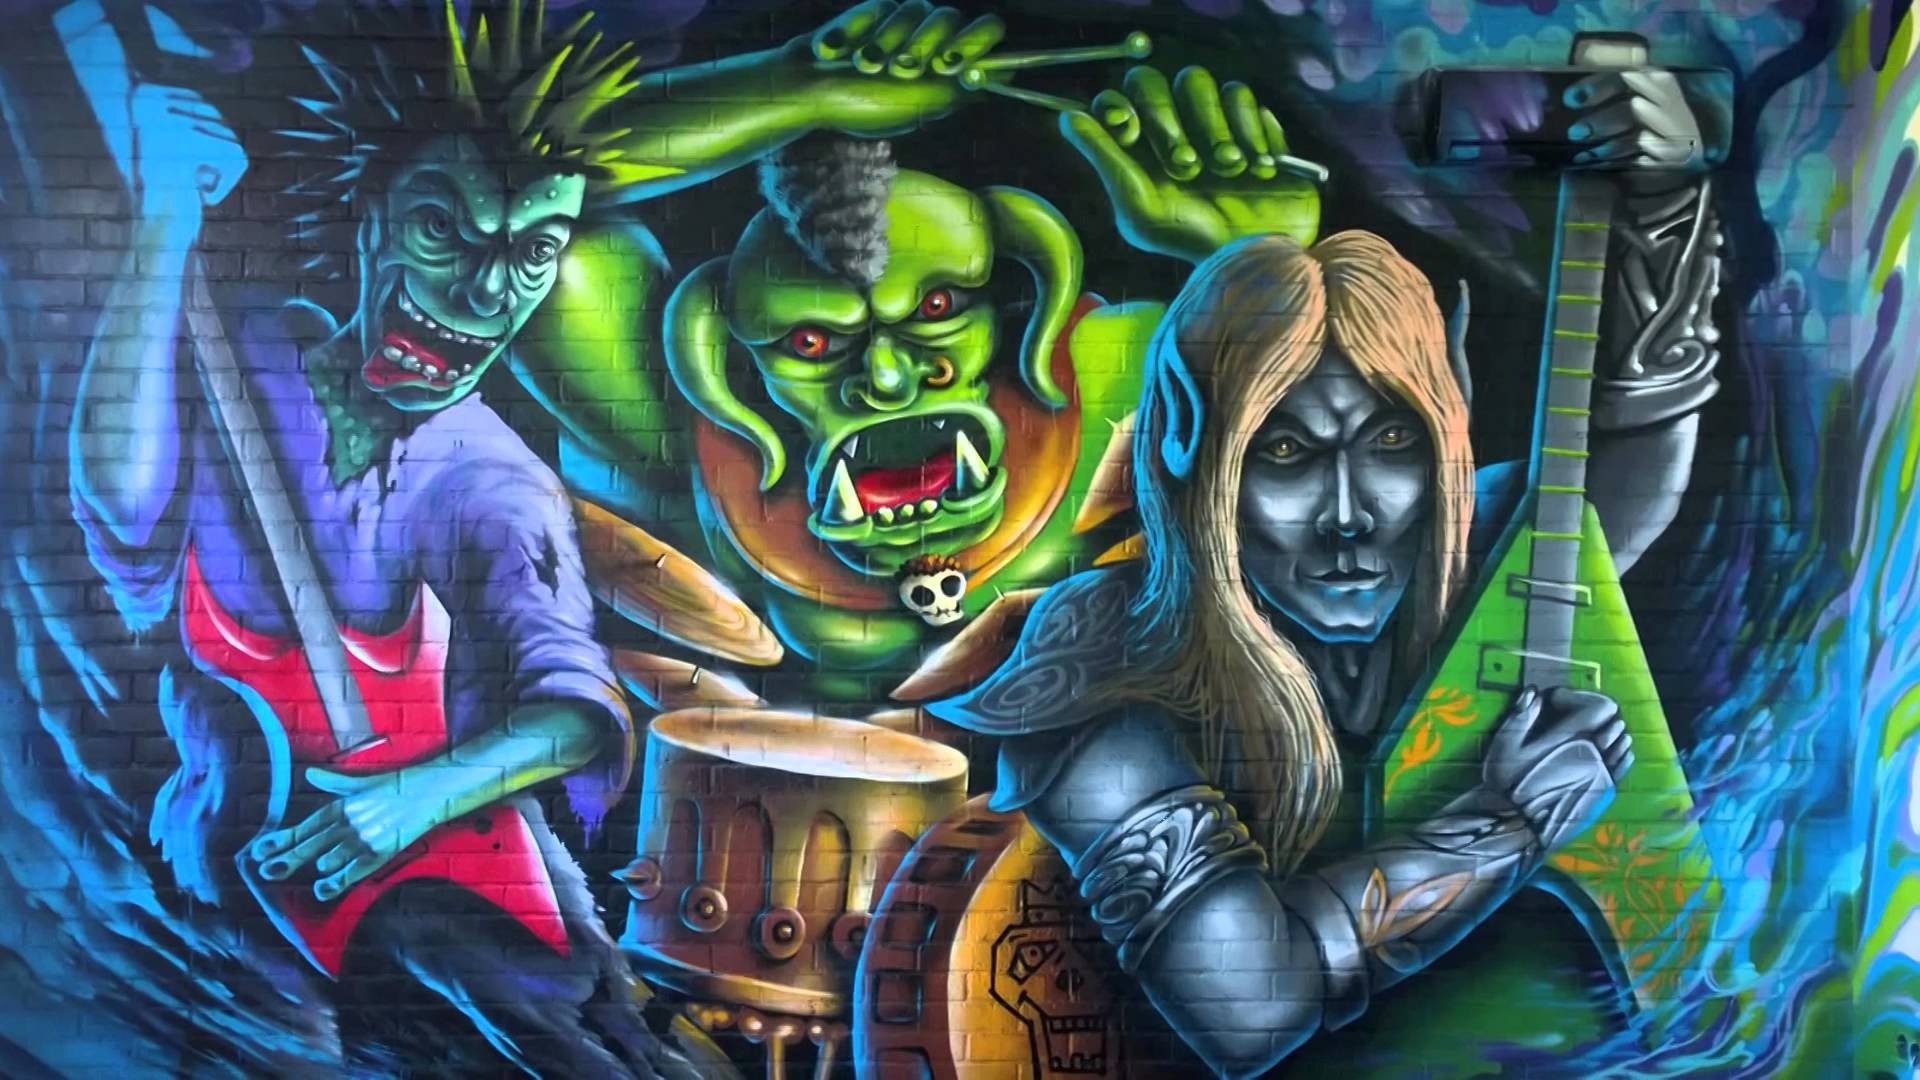 Graffiti Characters Wallpaper For Desktop with resolution 1920X1080 pixel. You can use this wallpaper as background for your desktop Computer Screensavers, Android or iPhone smartphones